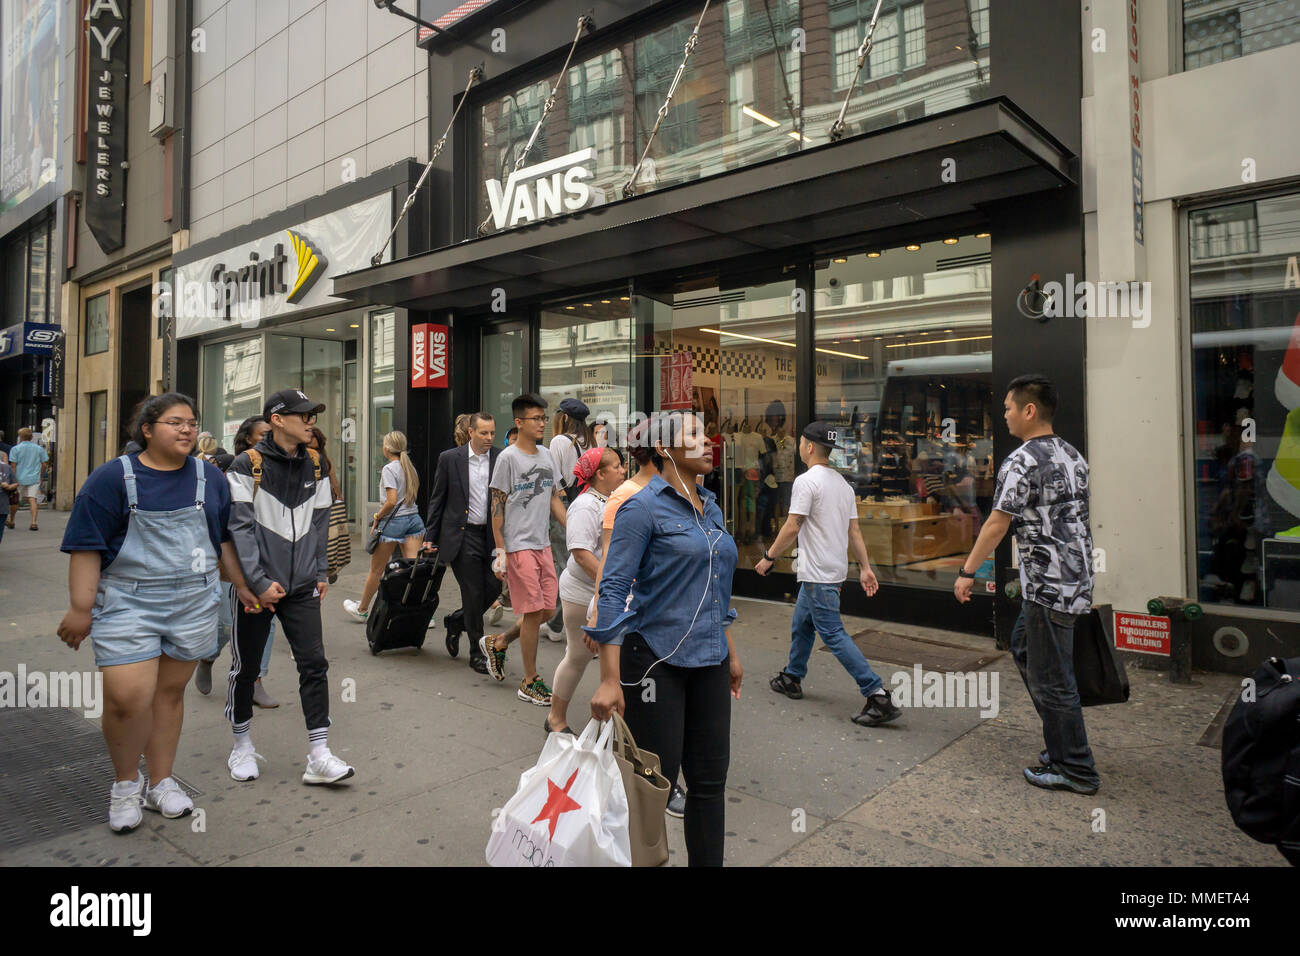 A Vans footwear store in Herald Square in New York on Friday, May 4, 2018.  VF Corp., the owner of North Face, Vans, Wrangler and other brands reported  first-quarter revenue the beat